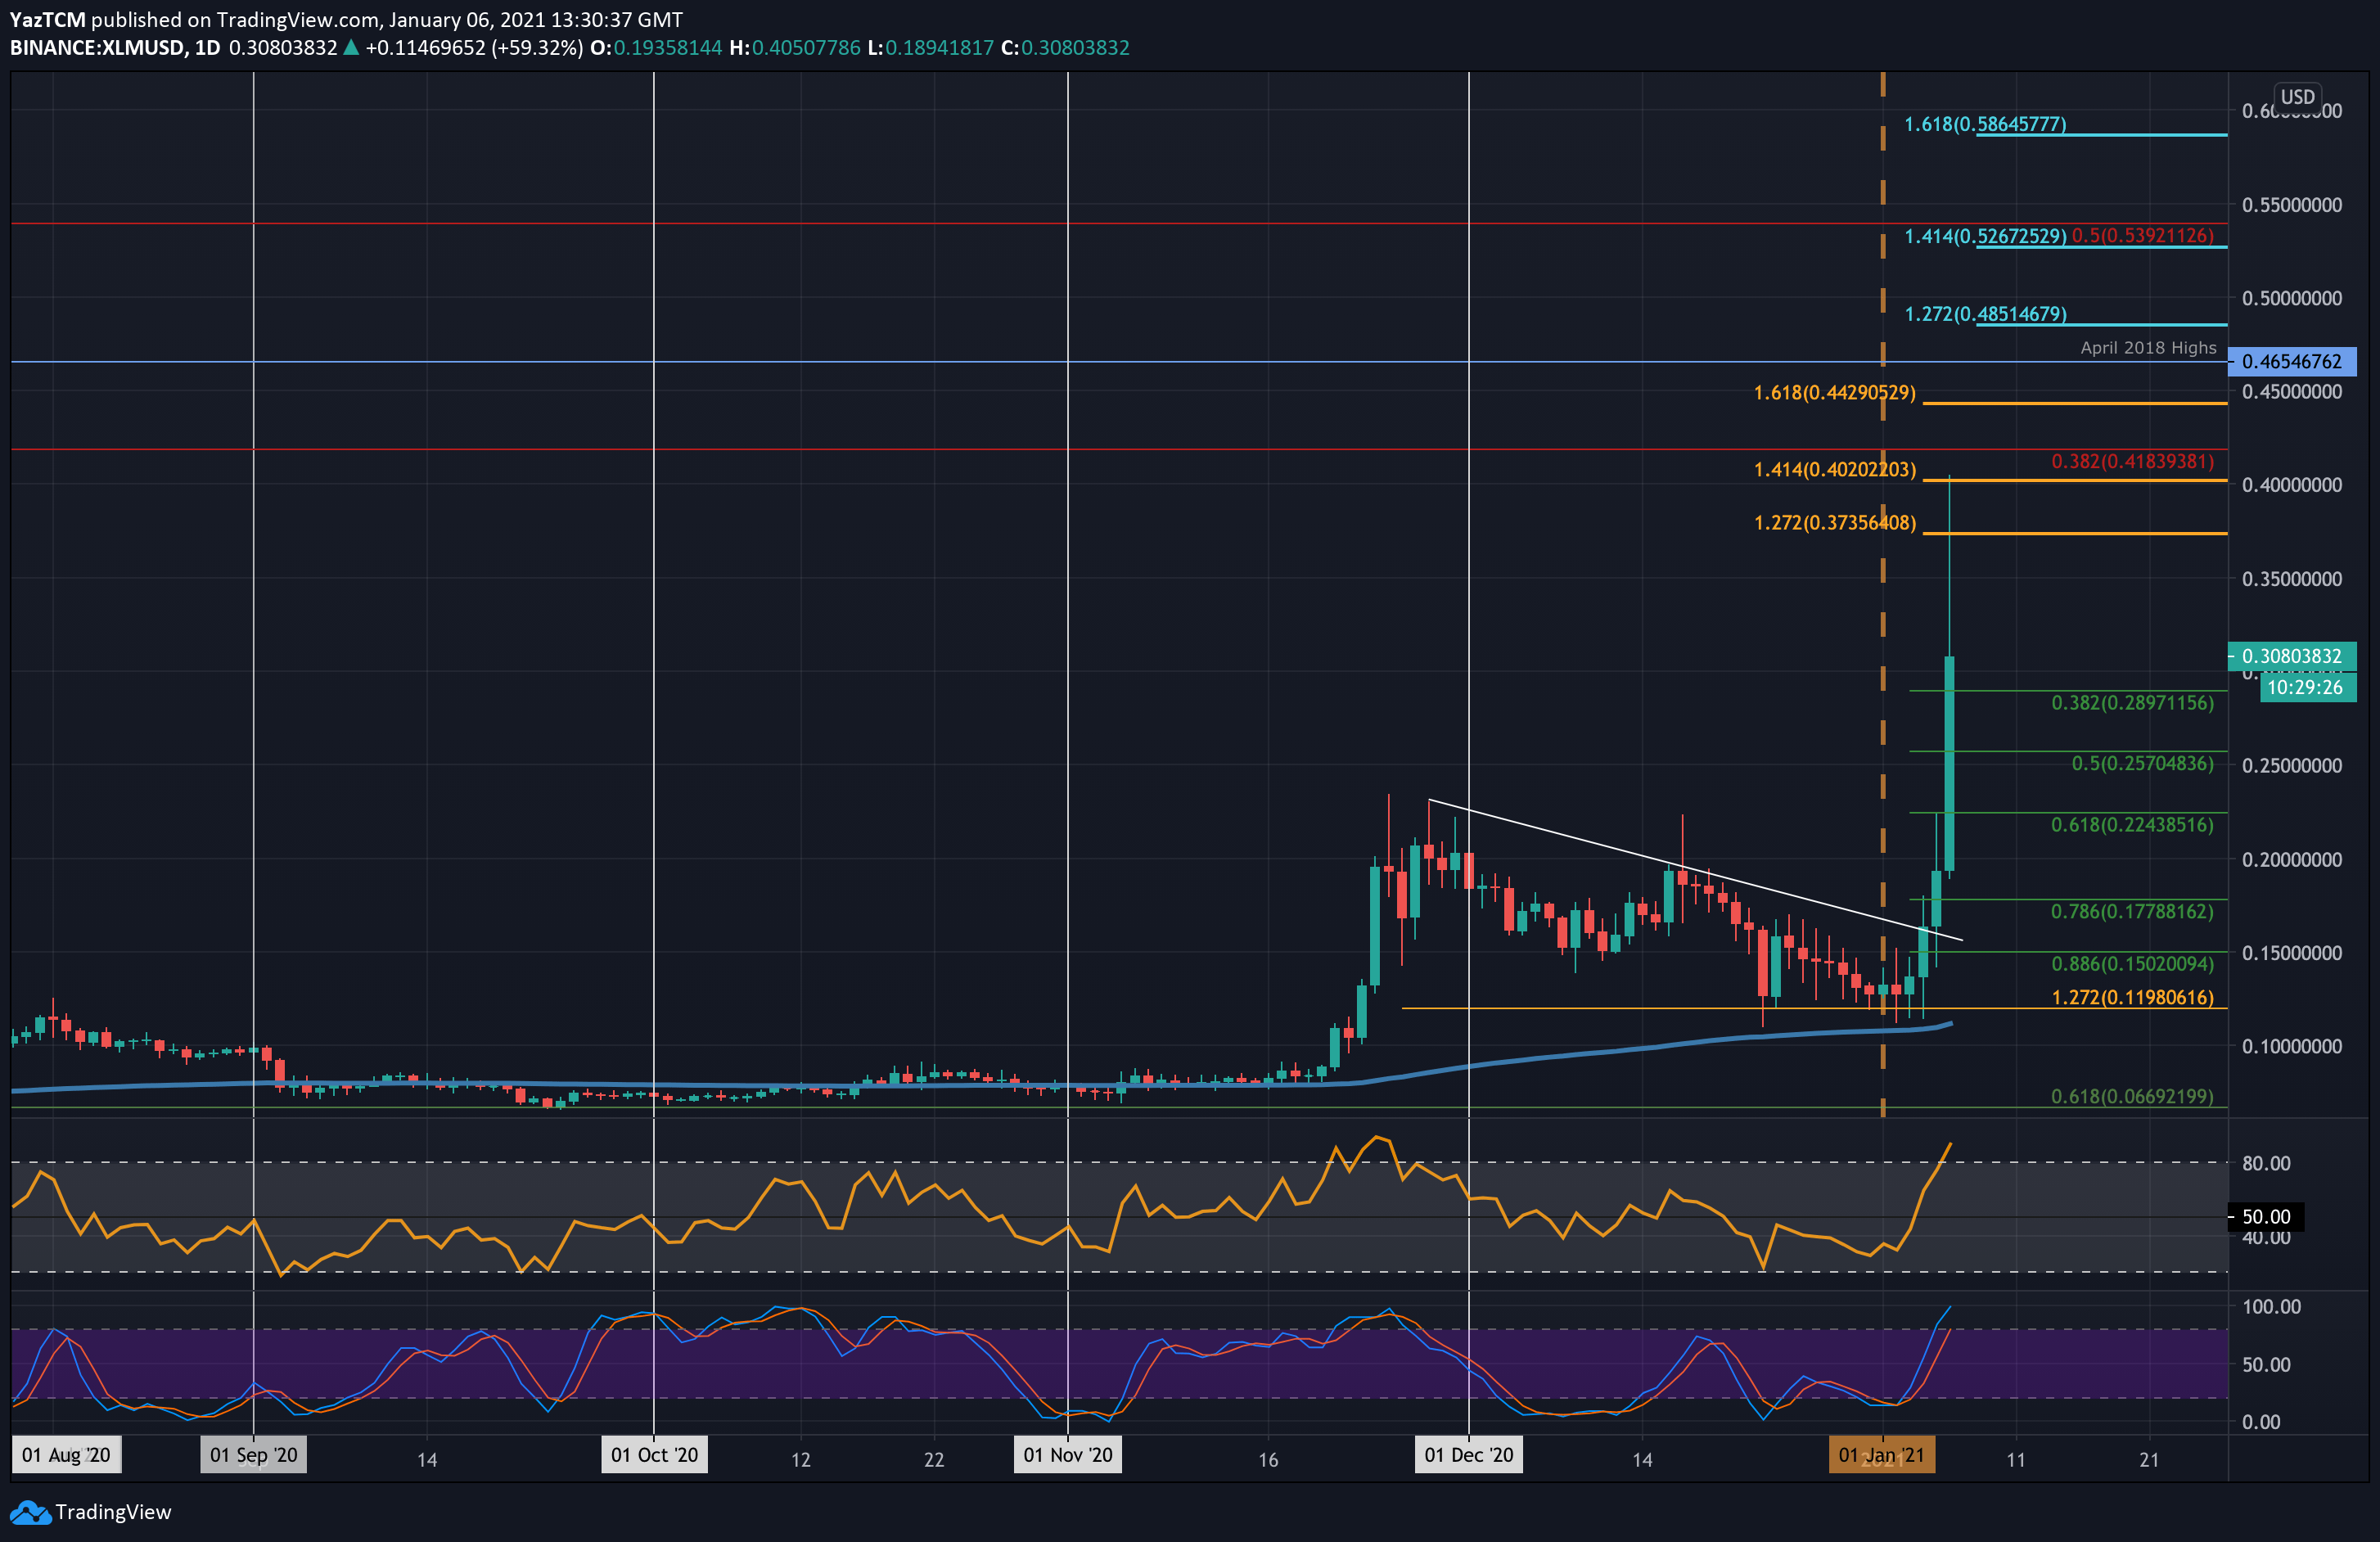 Stellar Price Analysis: XLM Goes Parabolic With 100% Daily Surge, What’s The Next Target?